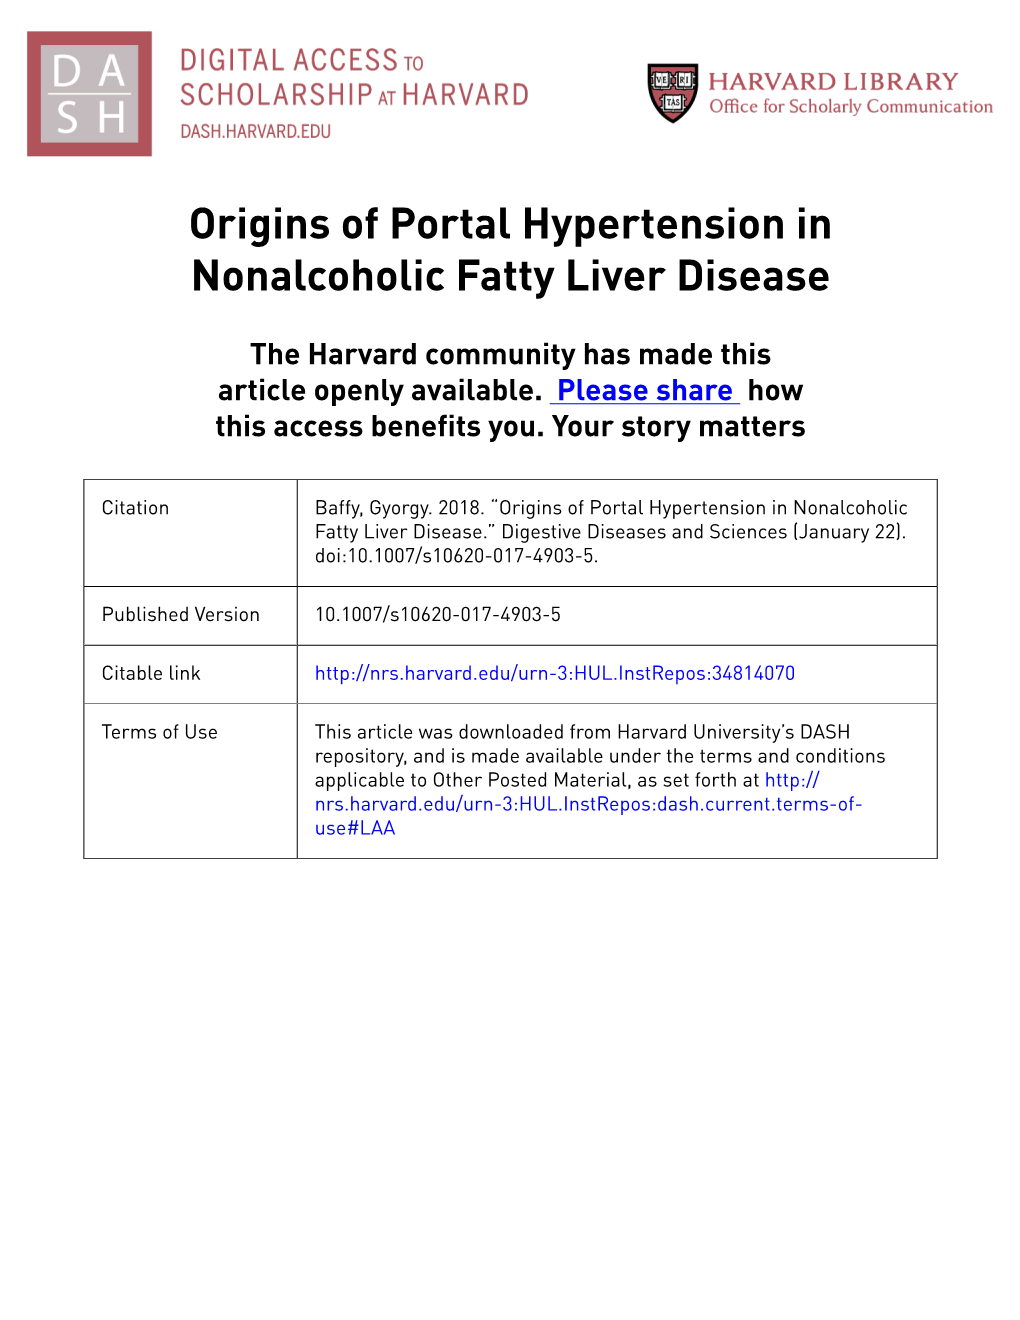 Origins of Portal Hypertension in Nonalcoholic Fatty Liver Disease